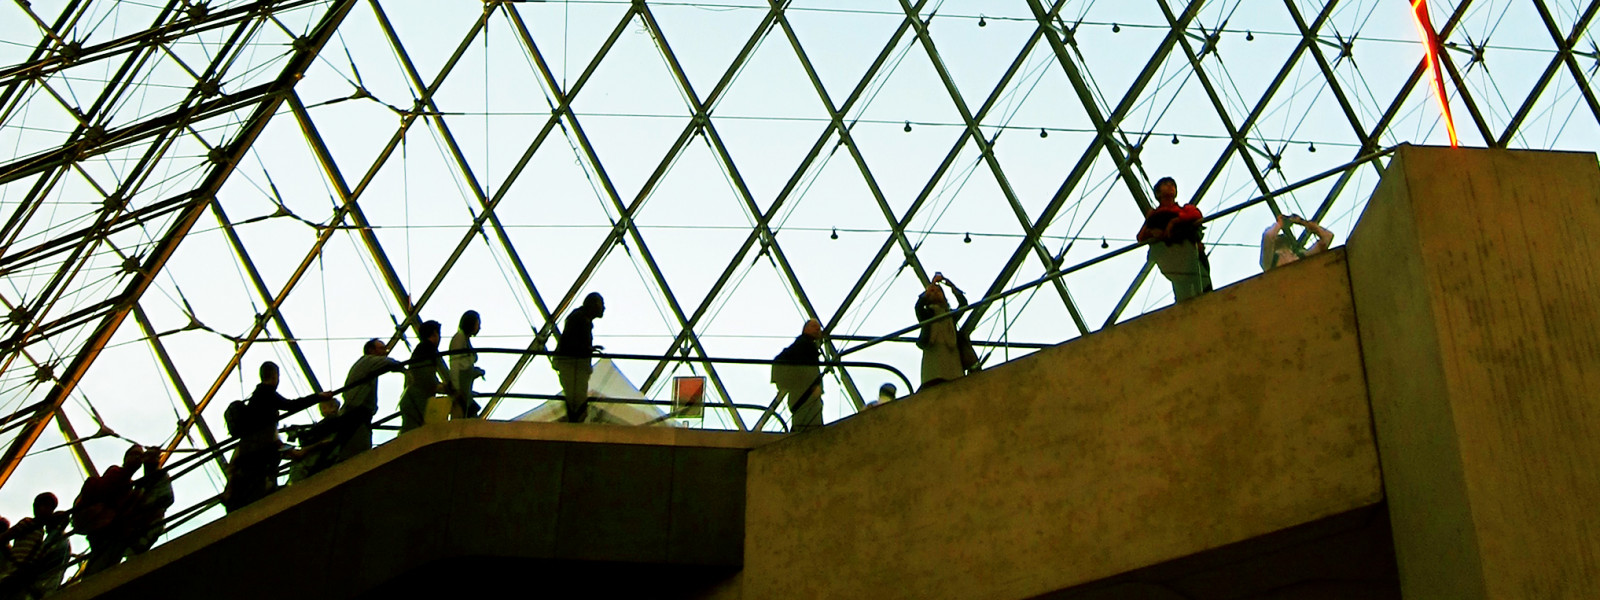 Visitors stand on the escalator inside of the Louvre Pyramid.